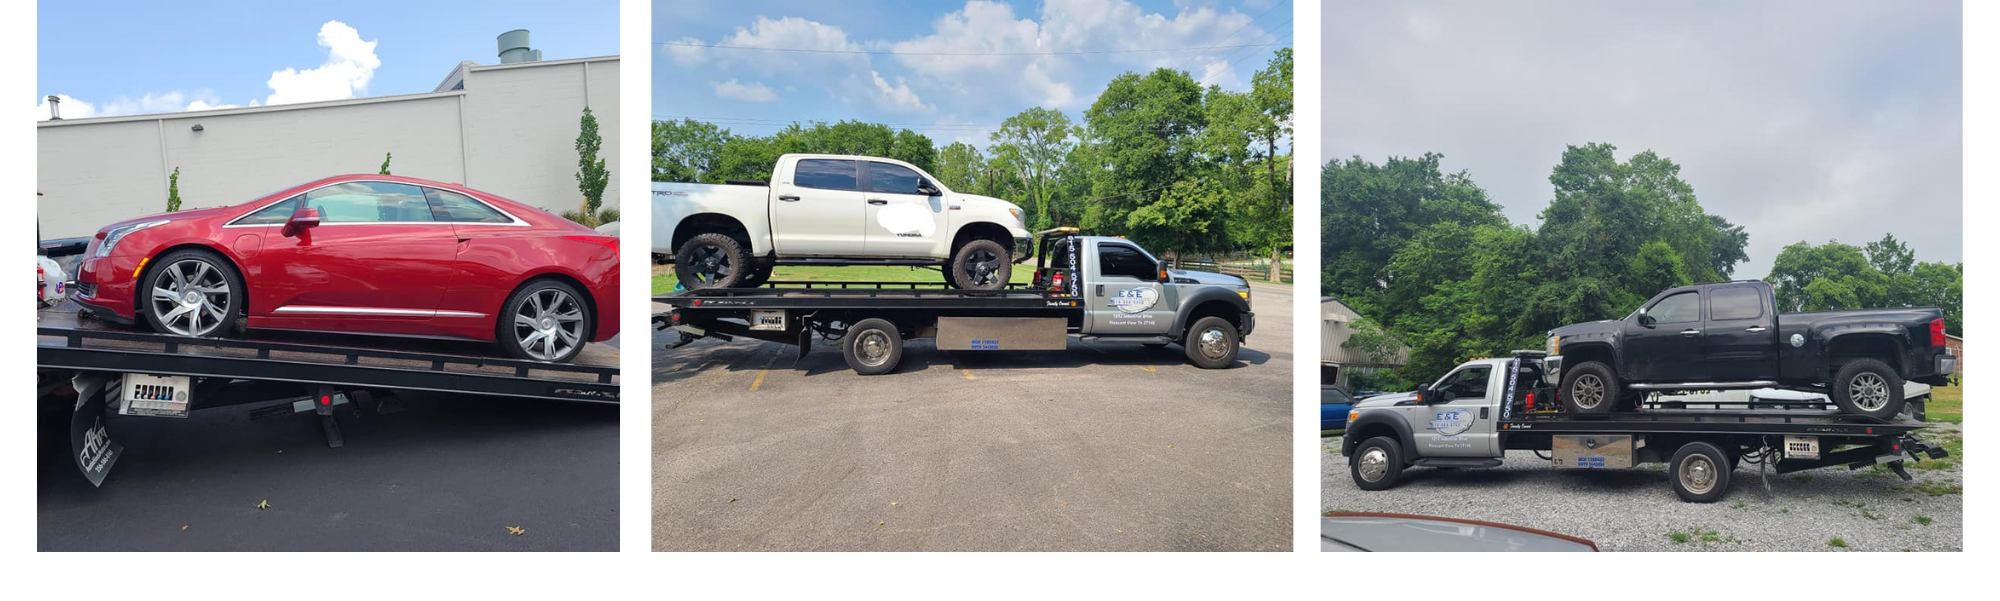 towing truck collage 